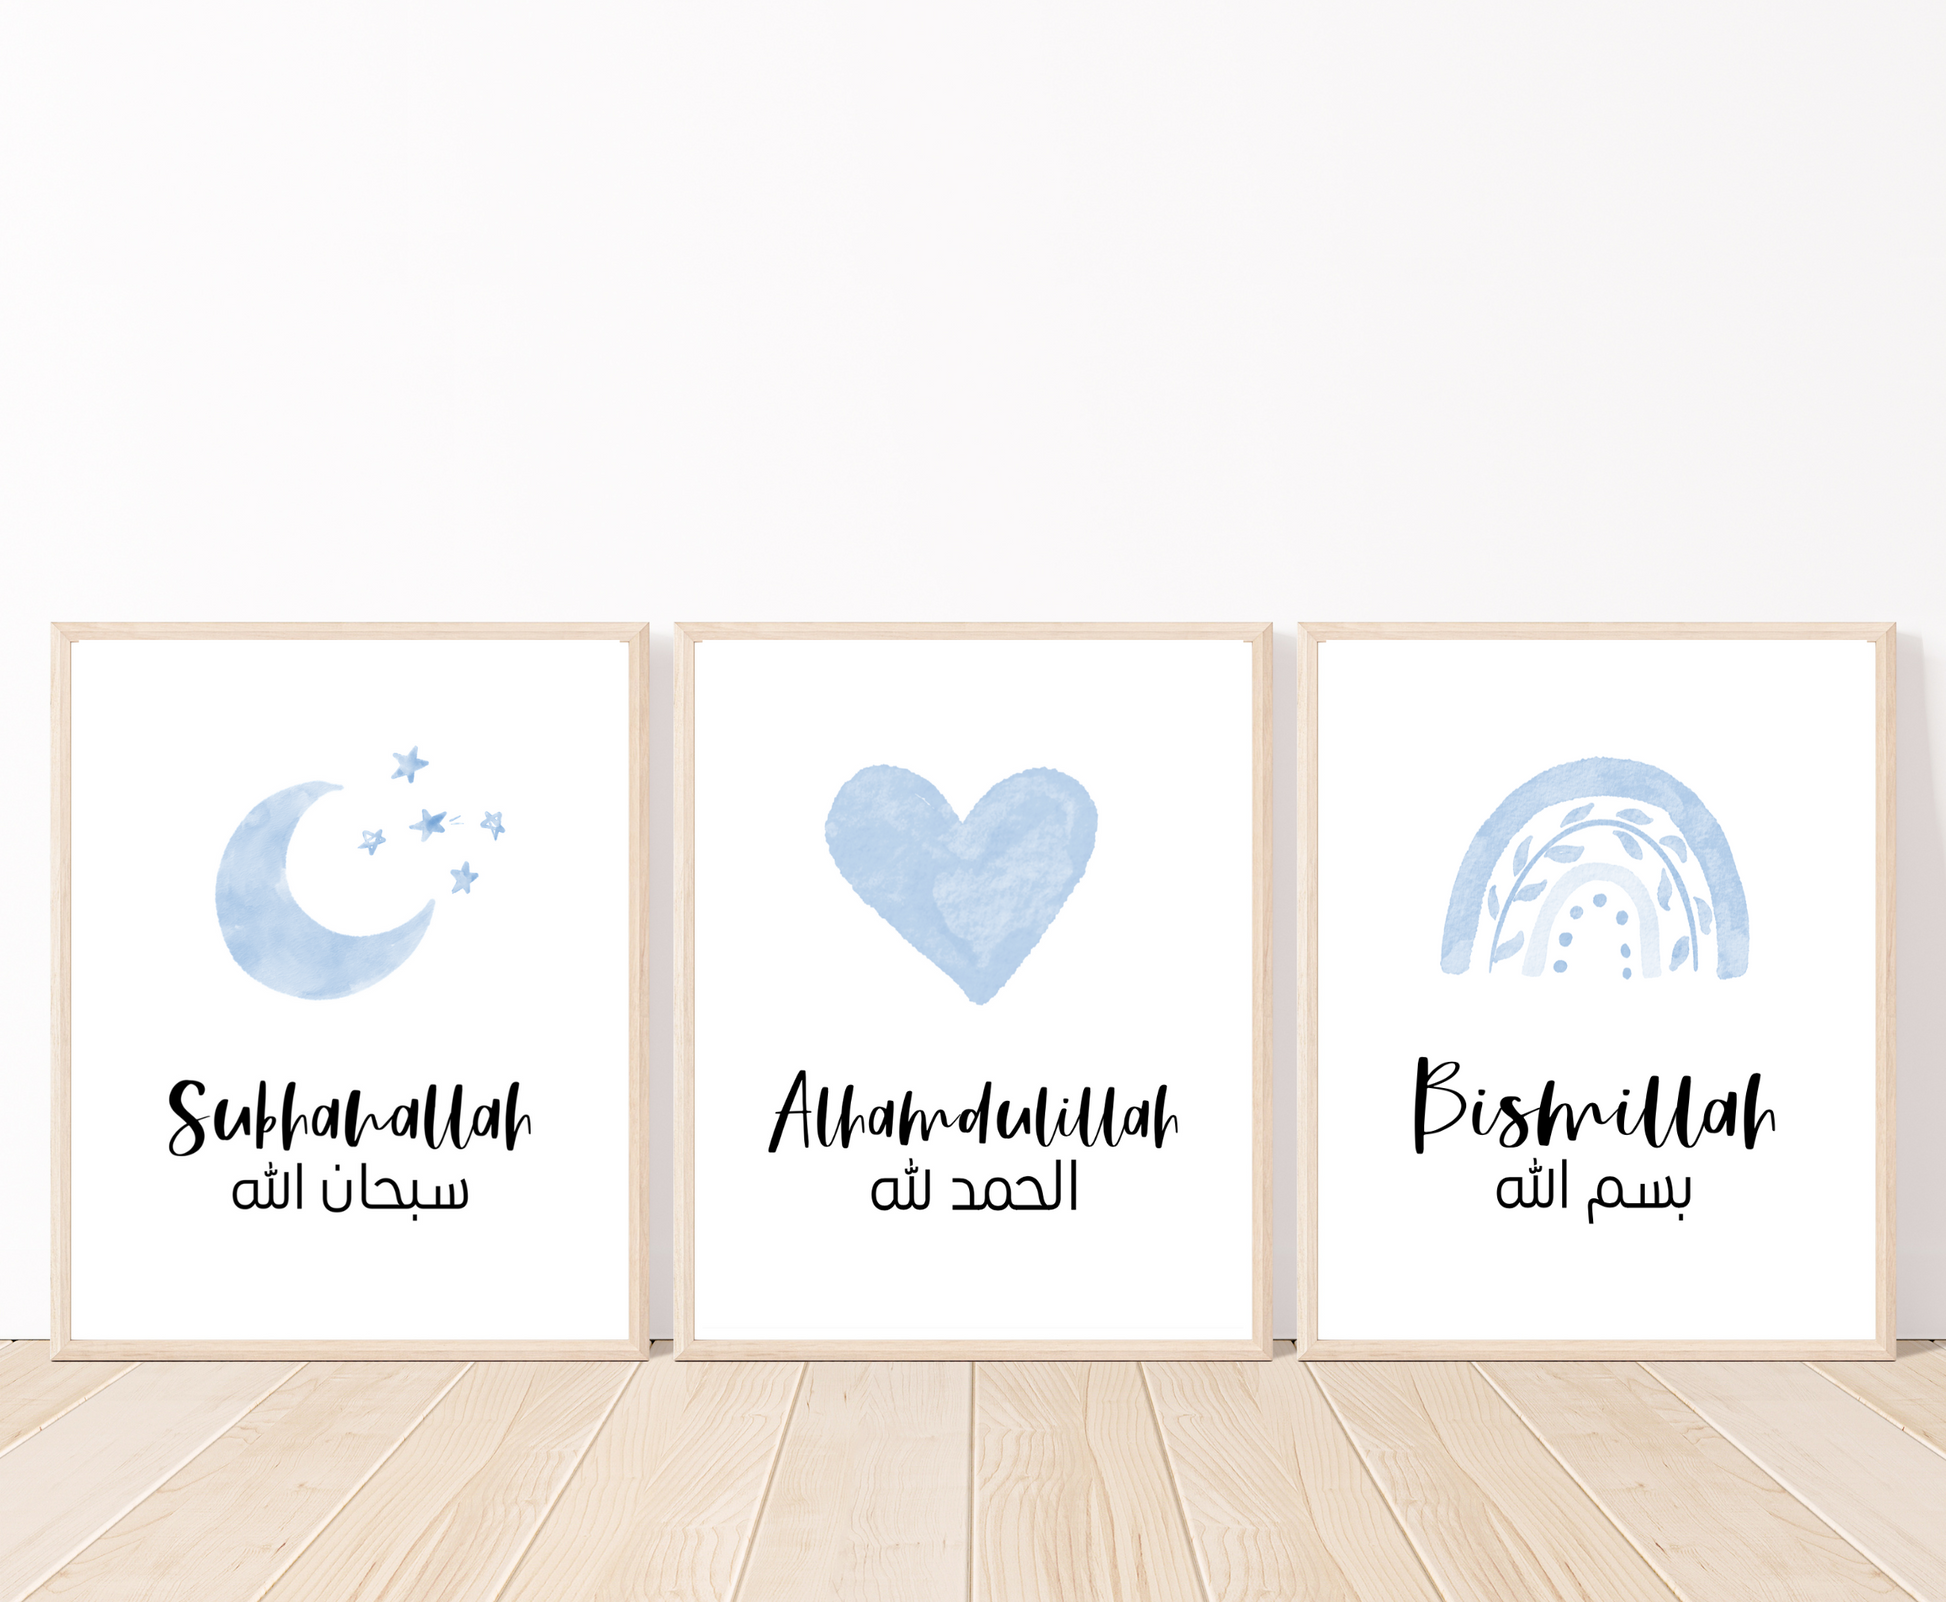 Three frames showing graphics for a baby boy’s room that are placed on a white wall and parquet flooring. The first one shows a small blue moon and three small stars with a piece of writing below that says: “Subhanallah”. The middle graphic shows a blue heart with a piece of writing below that says: “Alhamdulillah”. The last one shows a blue rainbow with a piece of writing below that says: “Bismillah”.